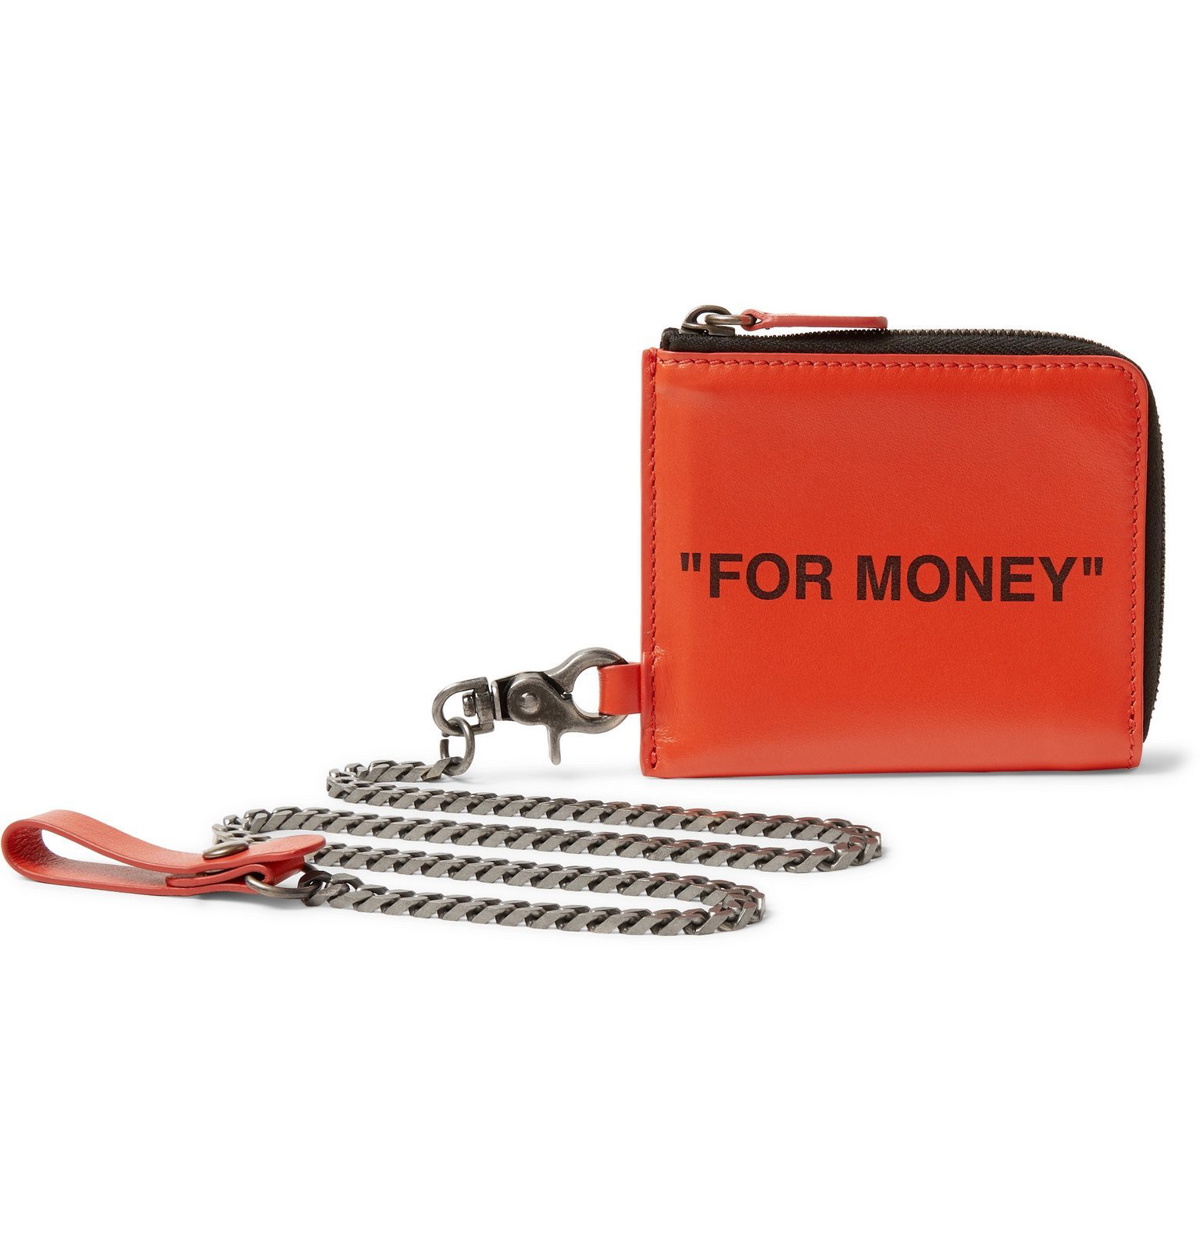 adidas x Gucci chain wallet in red and off-white